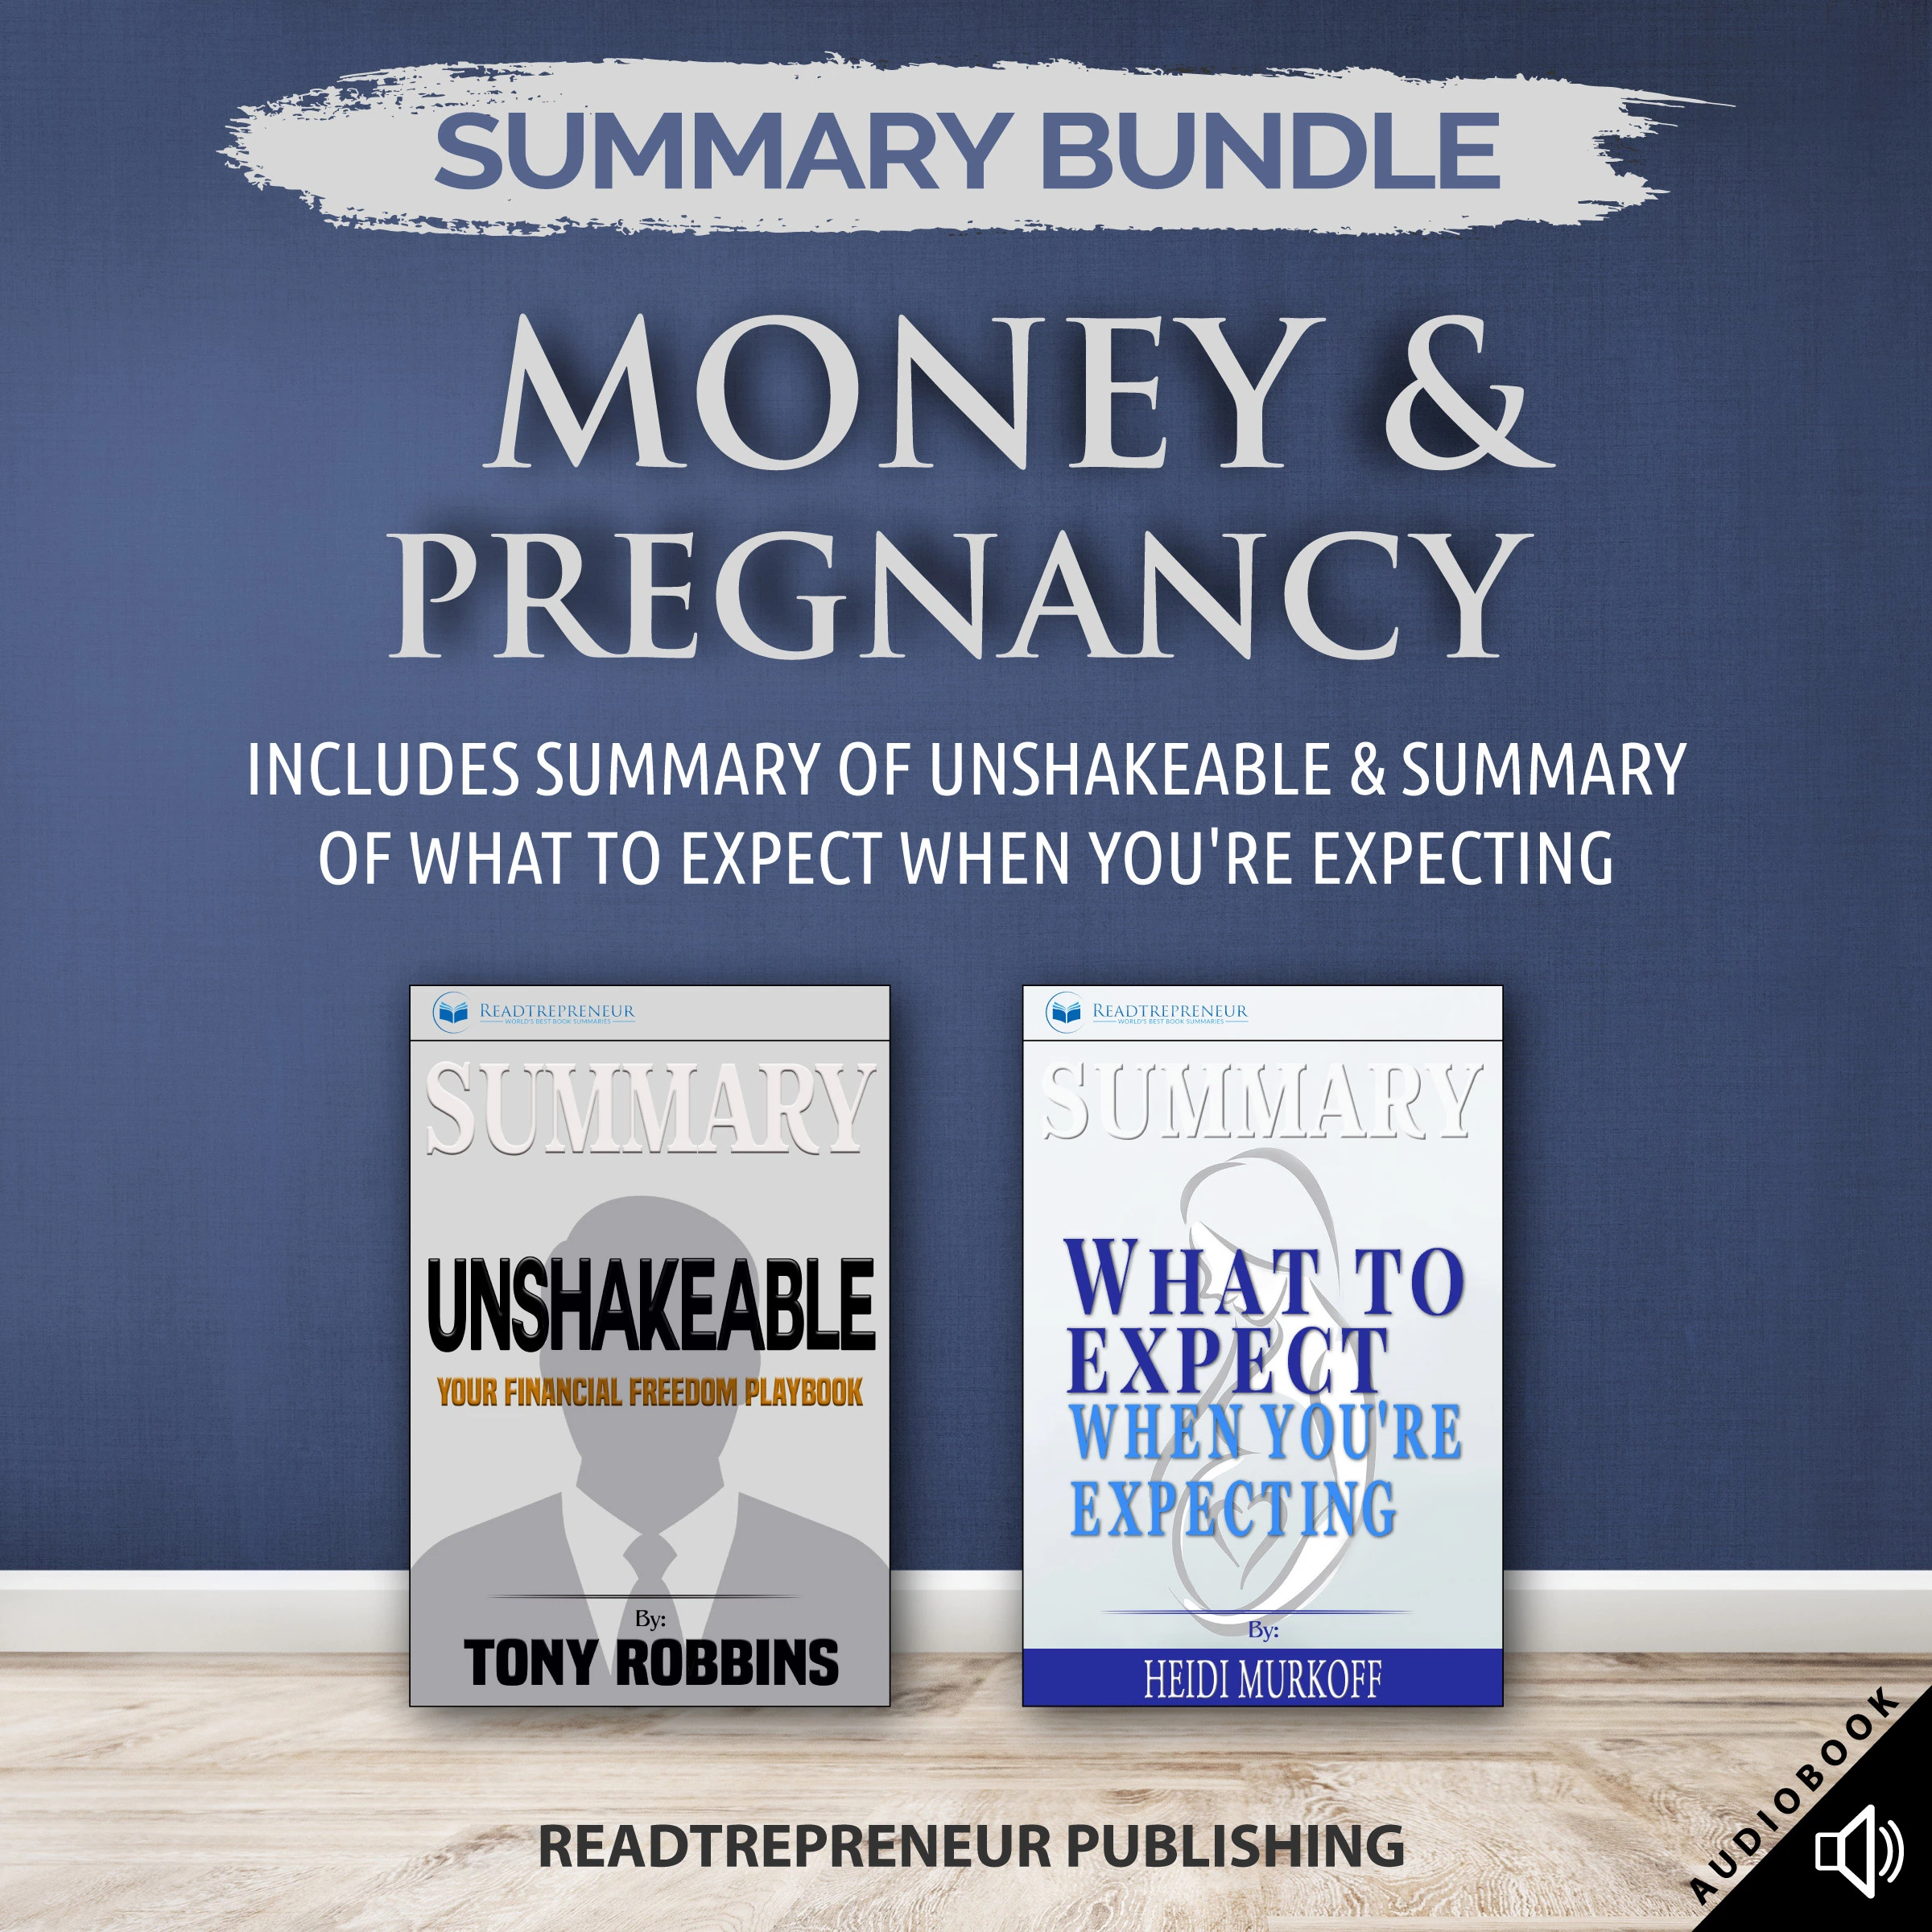 Summary Bundle: Money & Pregnancy | Readtrepreneur Publishing: Includes Summary of Unshakeable & Summary of What to Expect When You're Expecting Audiobook by Readtrepreneur Publishing